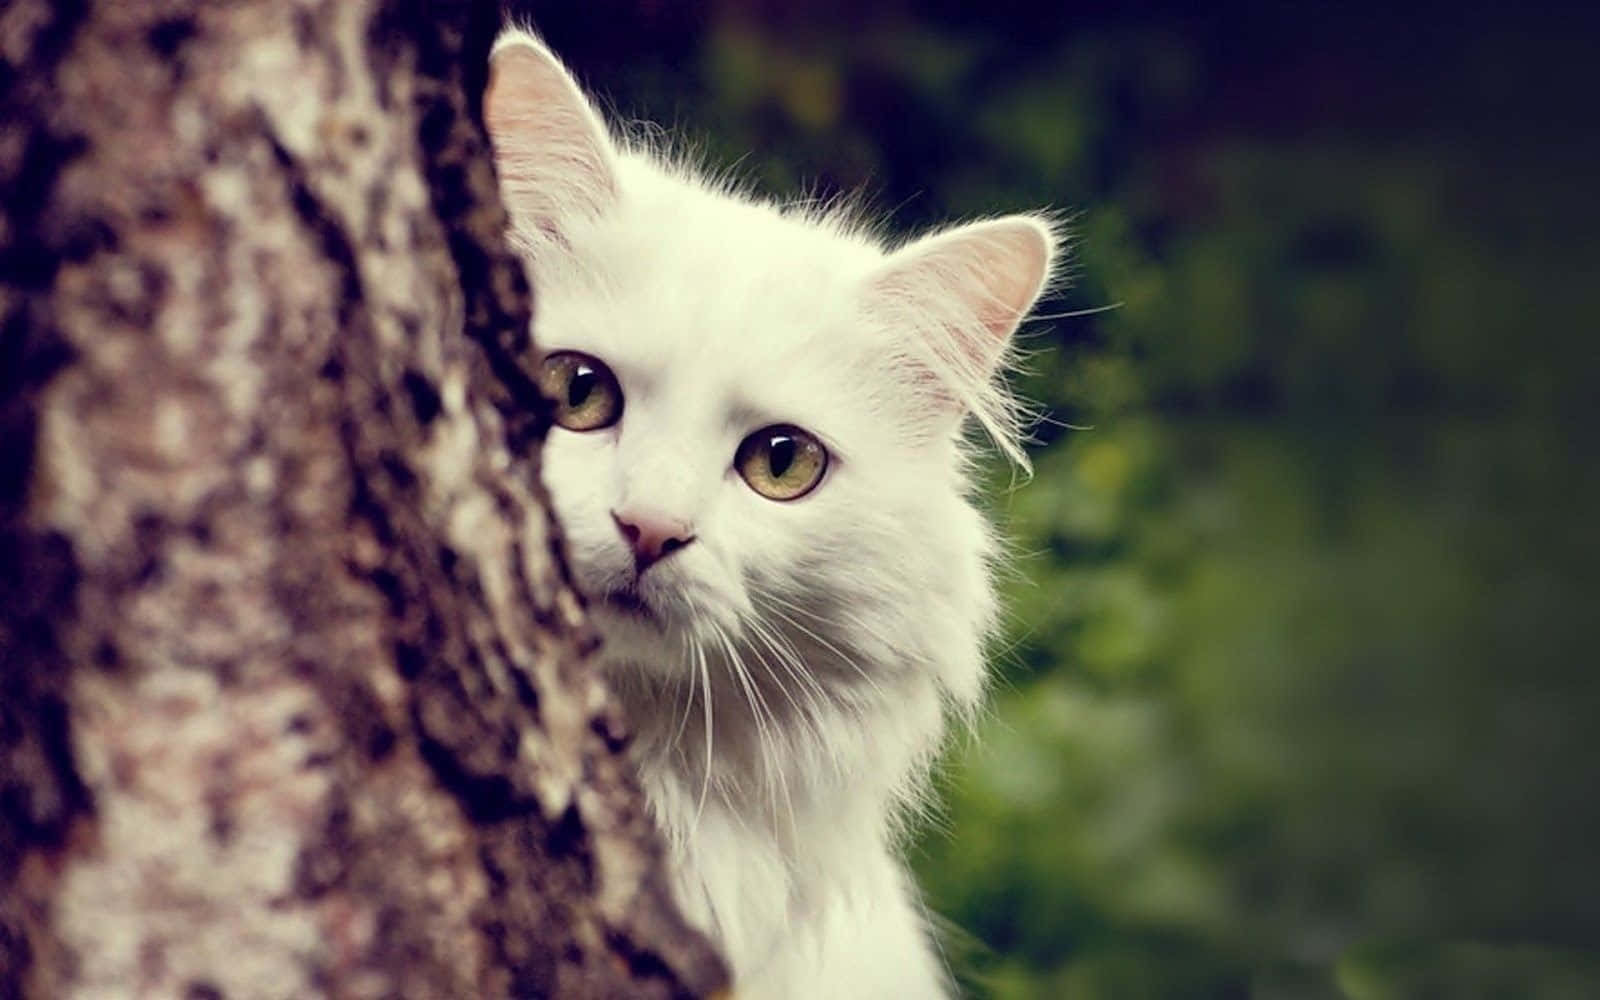 This kitty cat is looking for adventure!